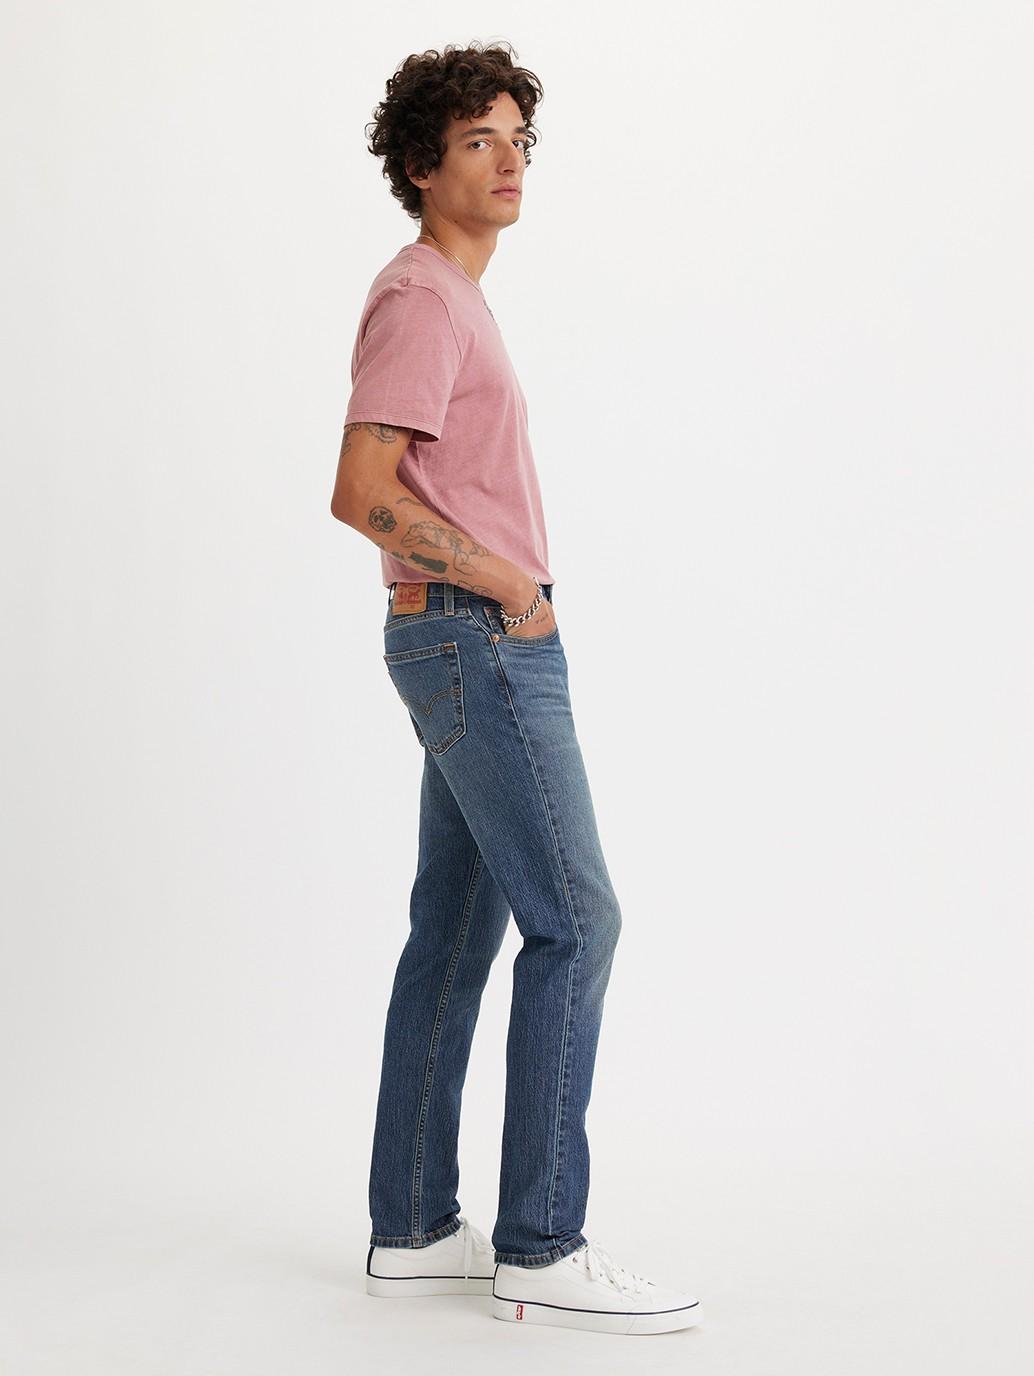 The best alternative to vintage? Levi's 501 skinny jeans review